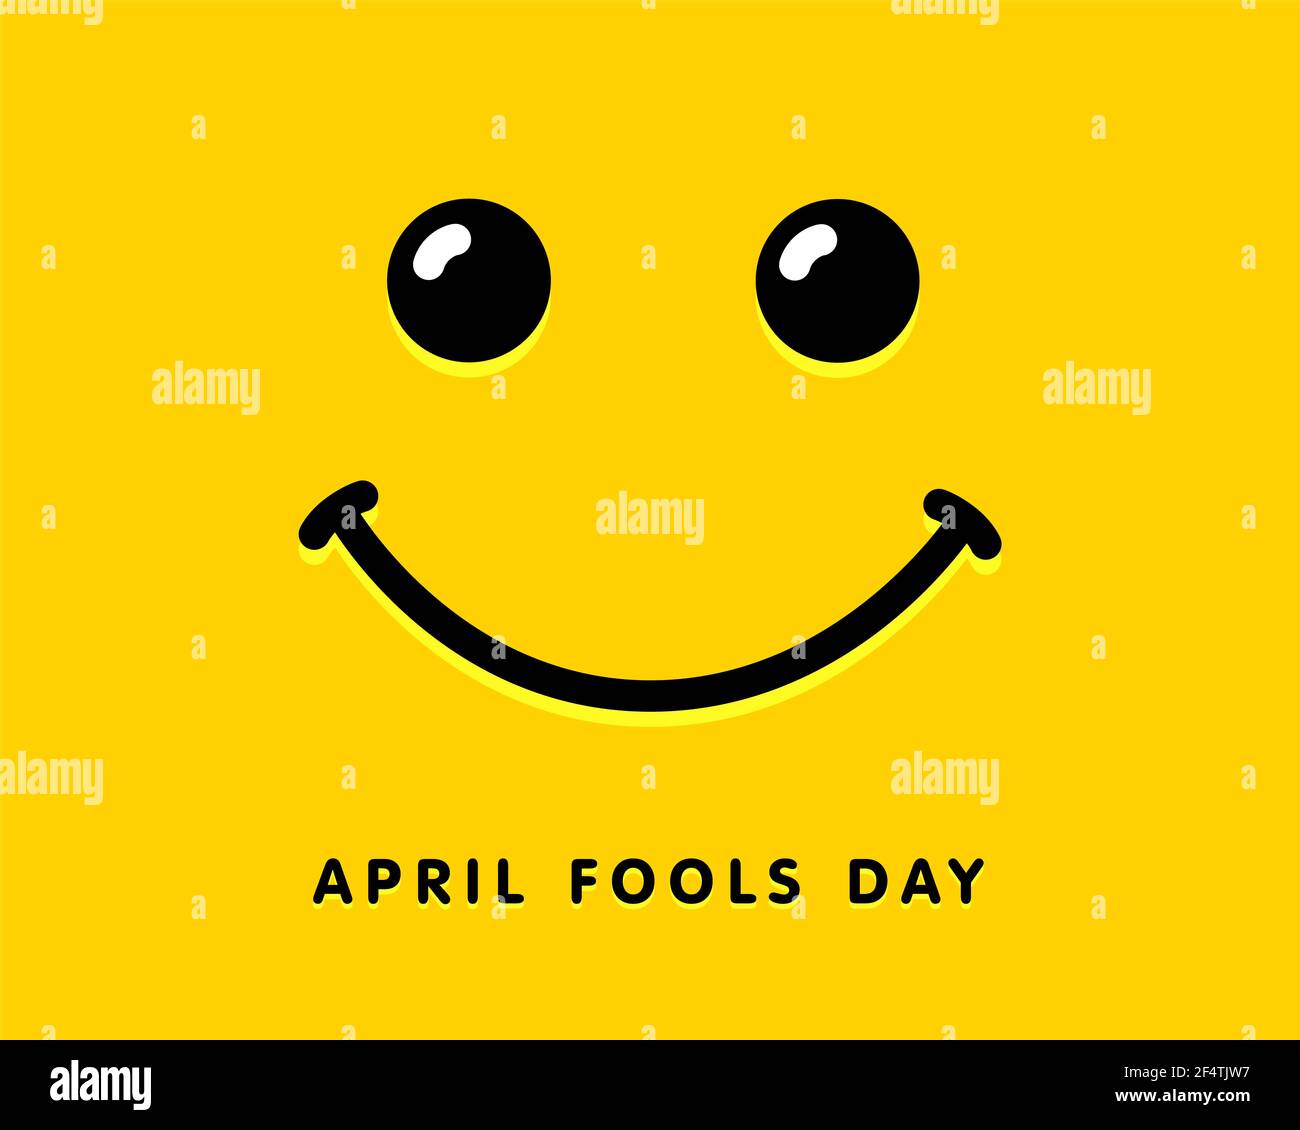 Happy April Fool's Day congrats. Smiling yellow greeting card with text. Isolated abstract graphic design template. Cute greeting card concept. Callig Stock Photo